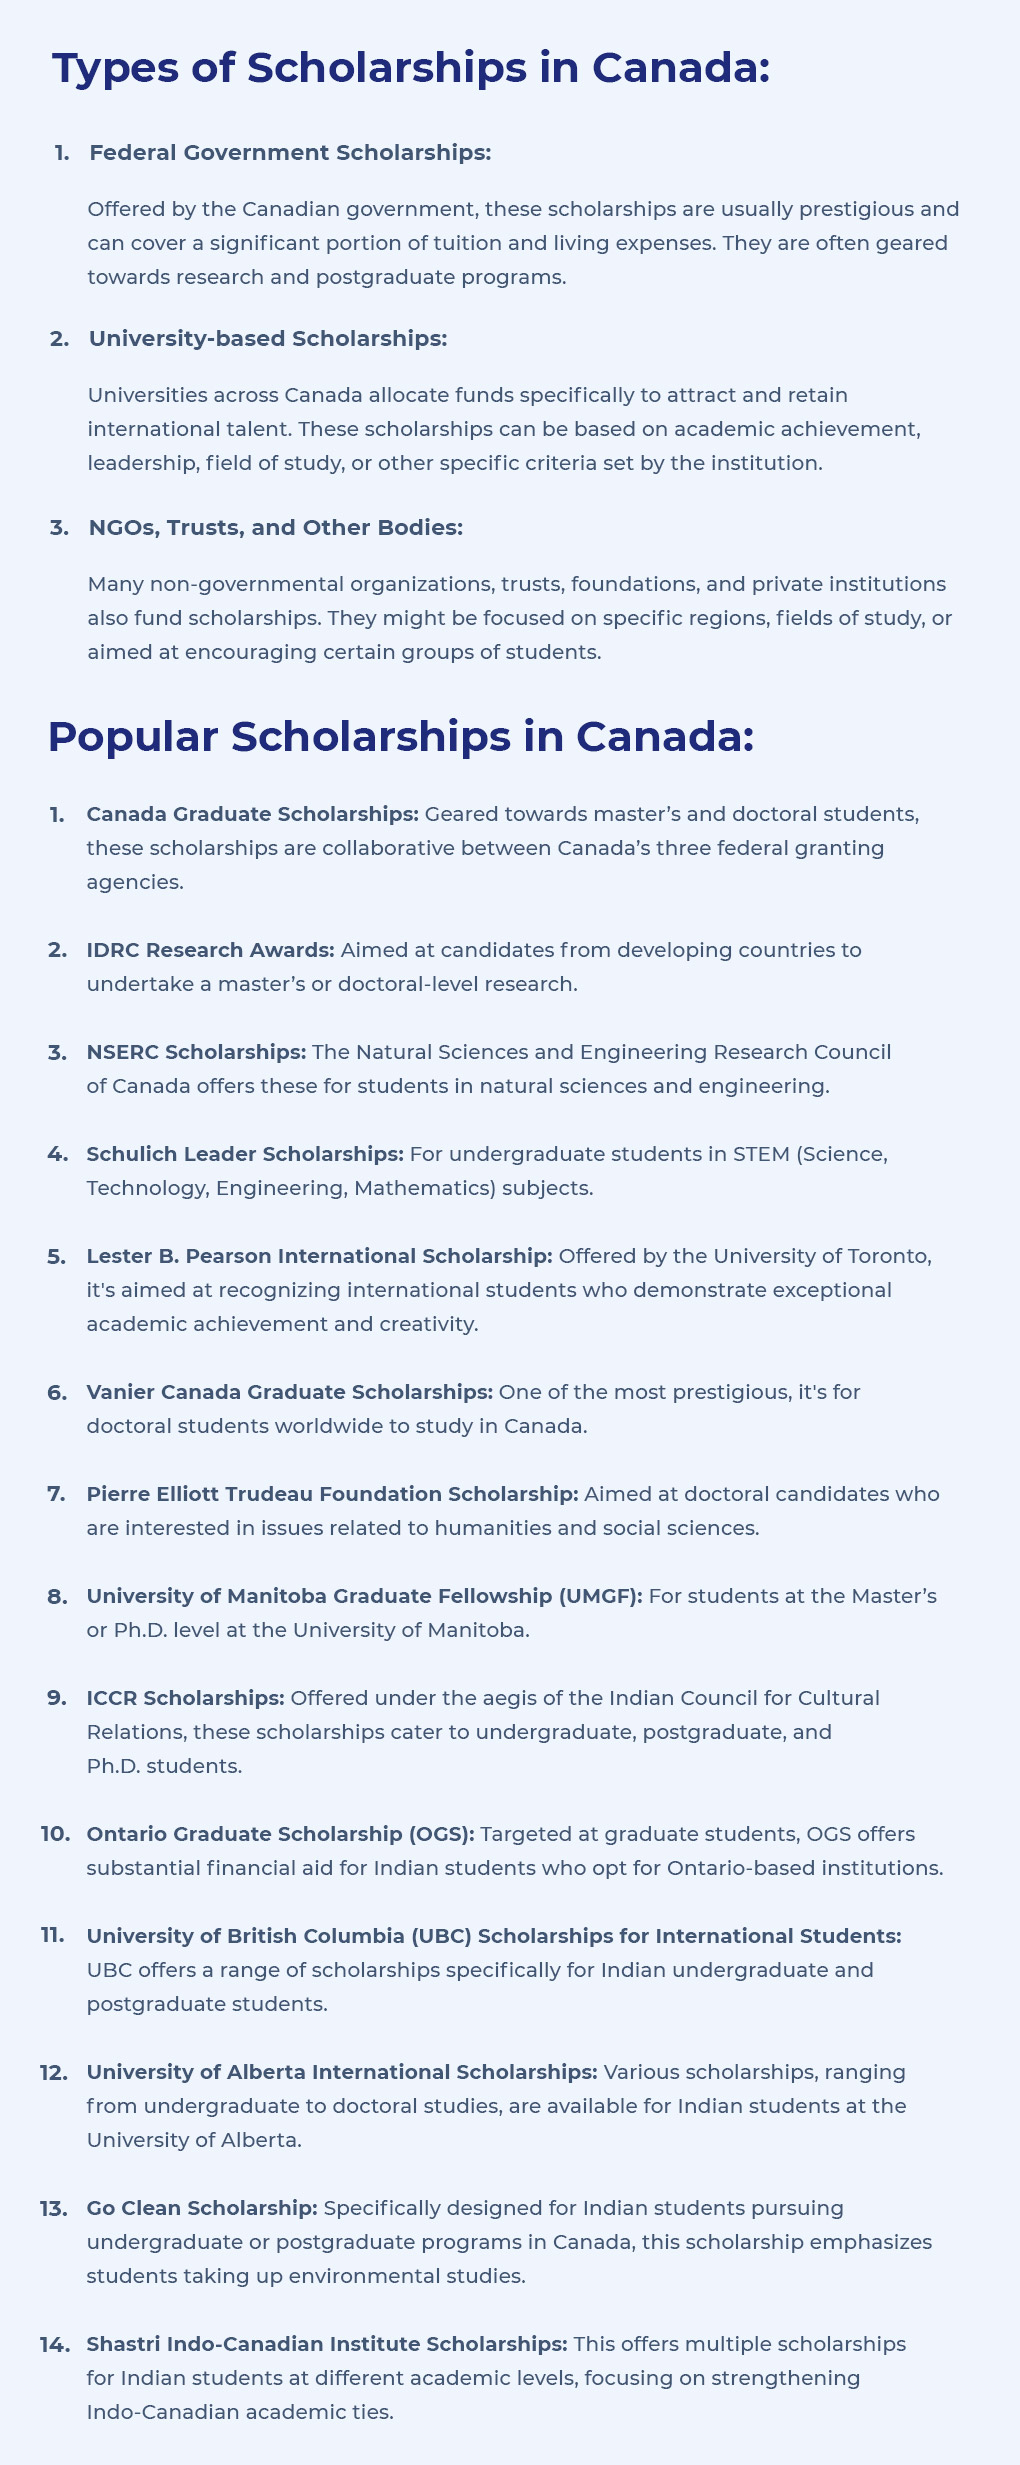 Types of Scholarships in Canada